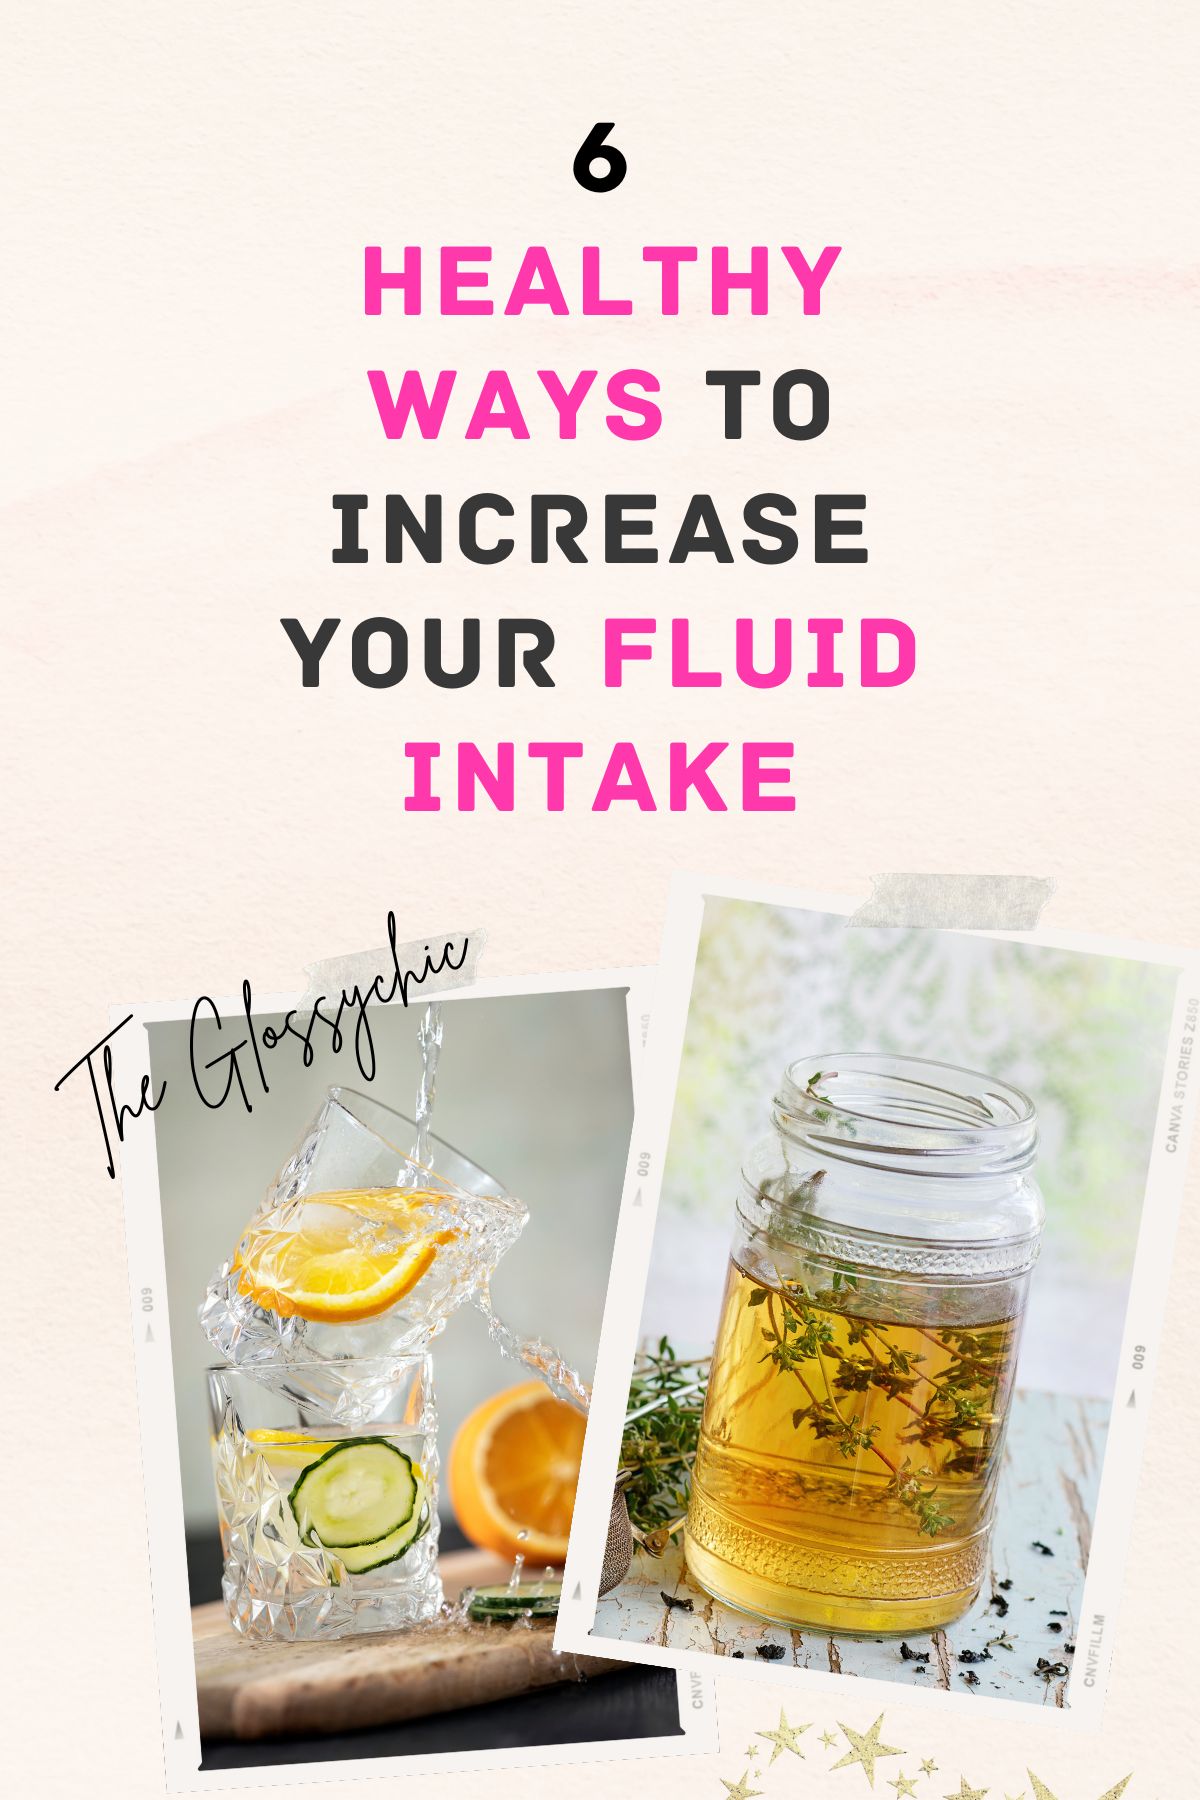 Healthy Ways To Increase Your Fluid Intake